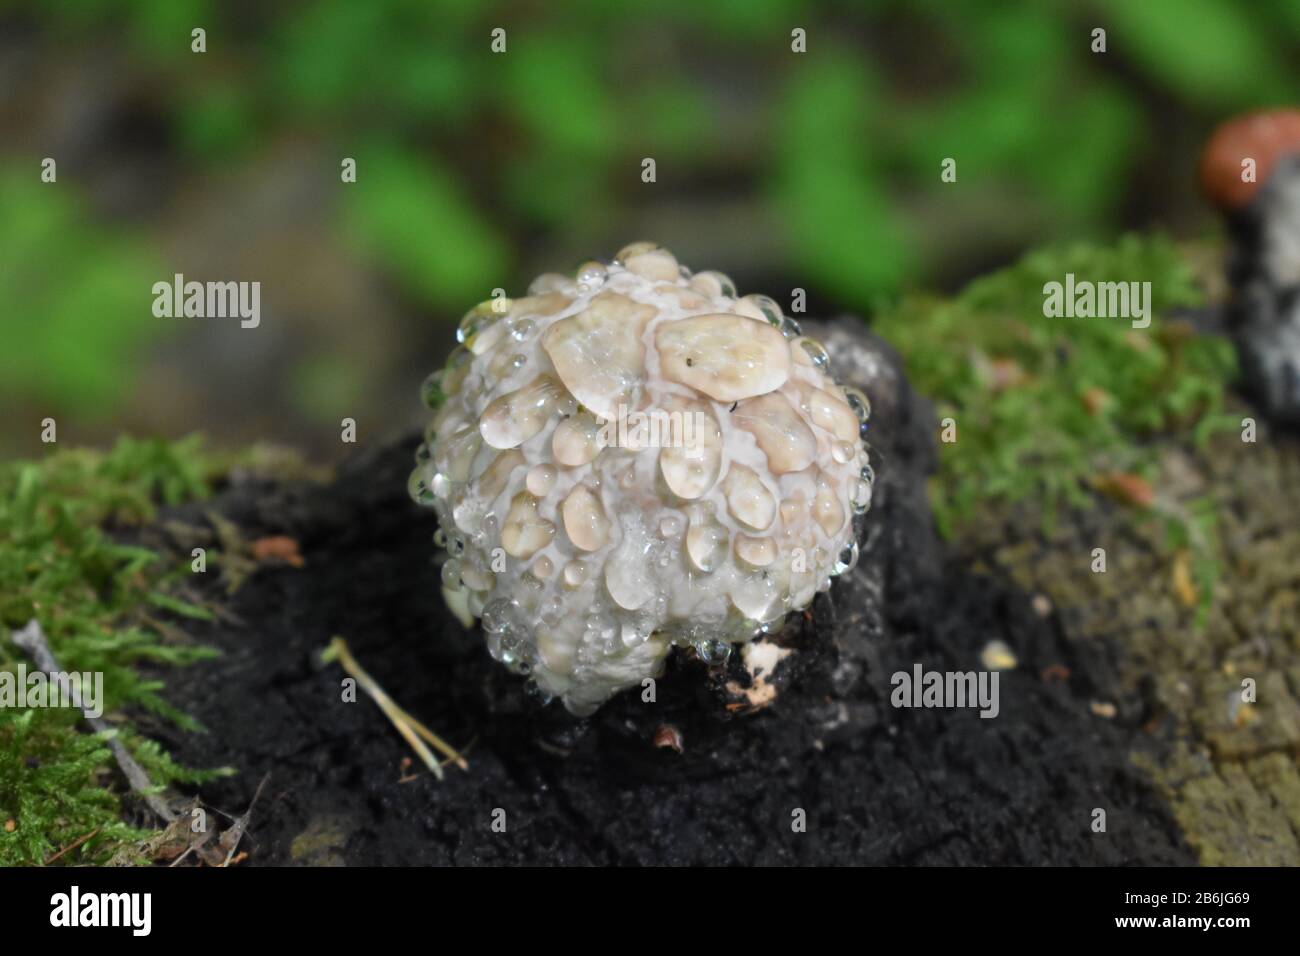 Puffball mushroom covered in raindrops forest background Stock Photo